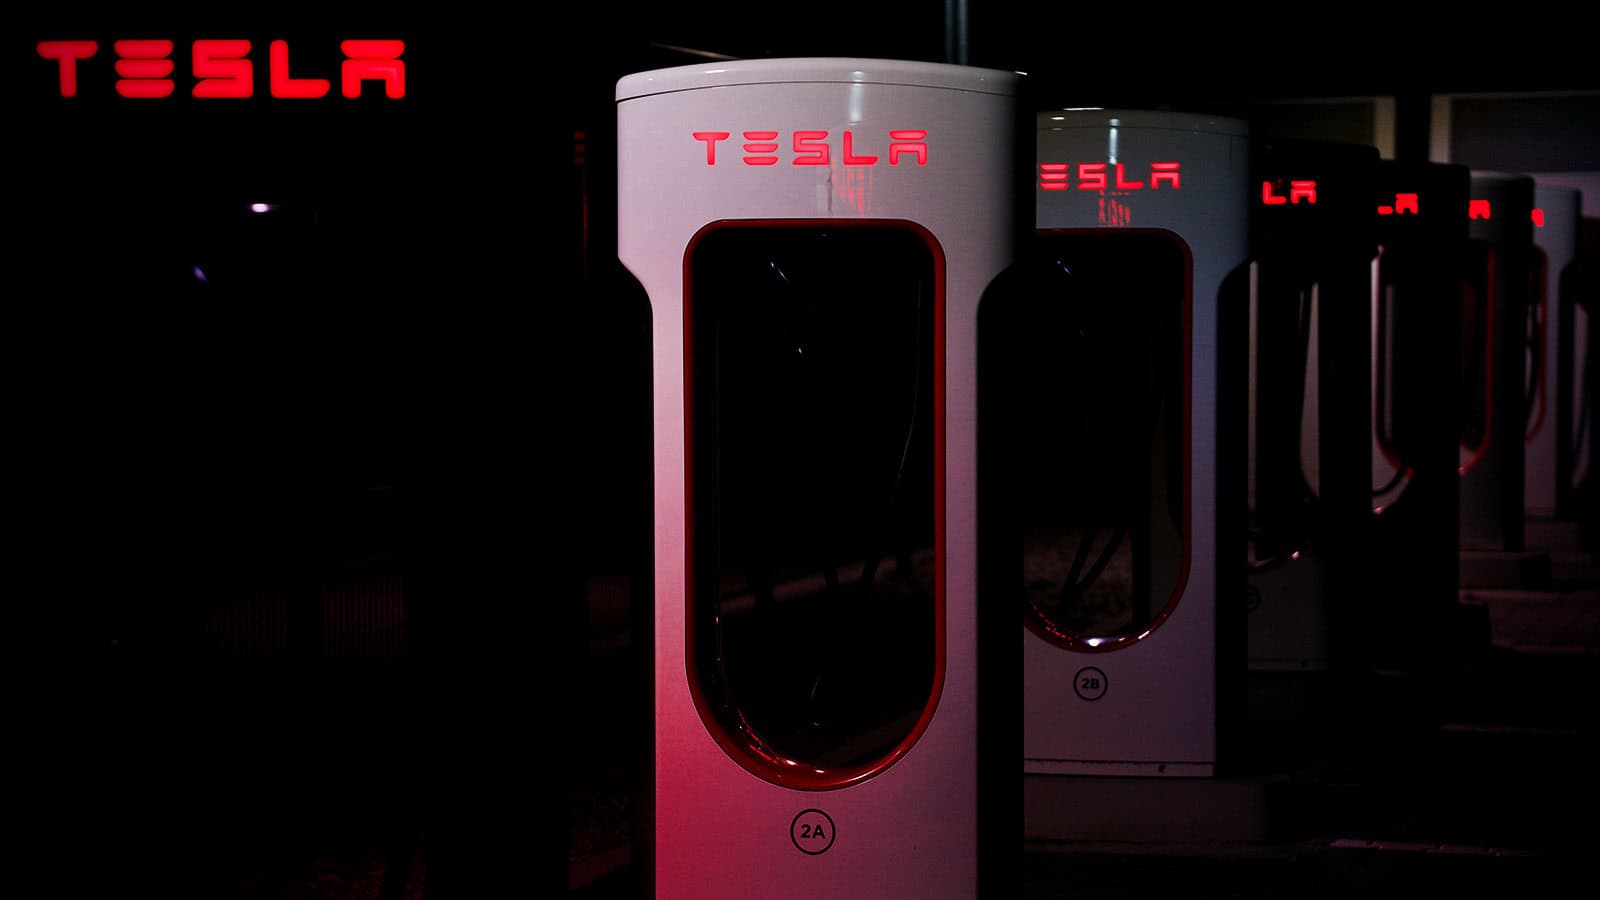 Row of Tesla Superchargers at night with red glow